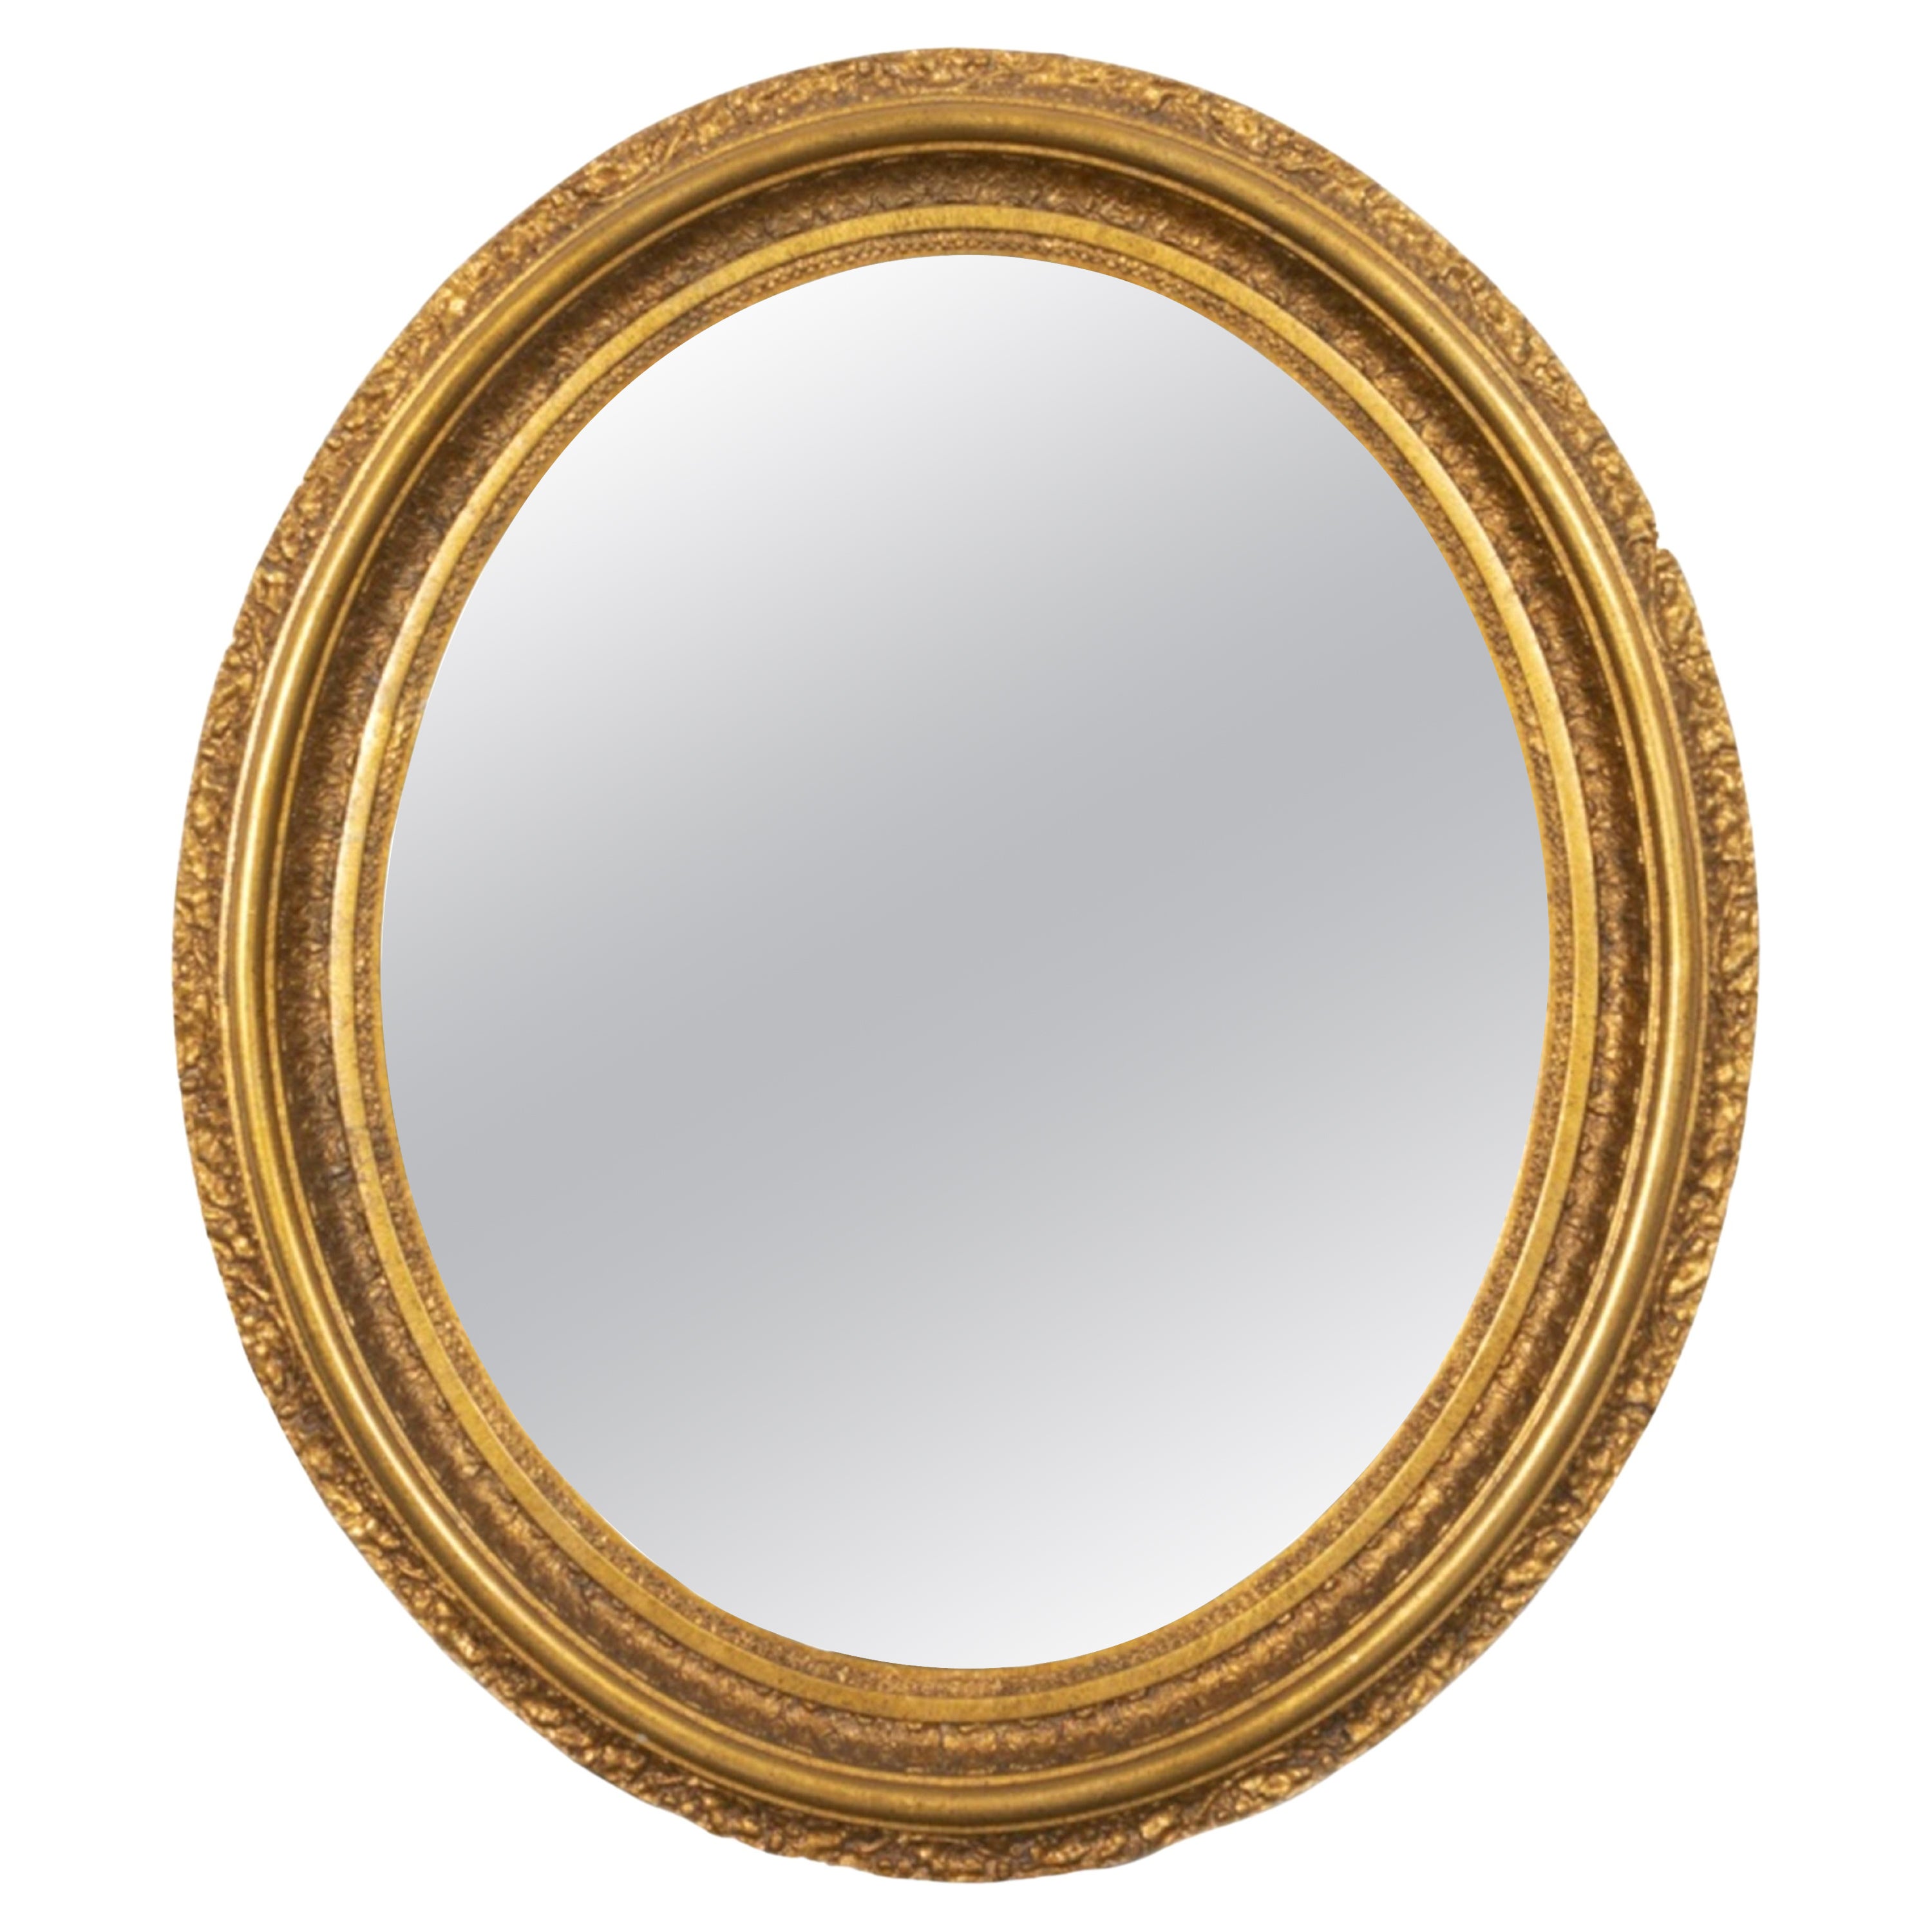 Rococo Revival Oval Giltwood Mirror For Sale